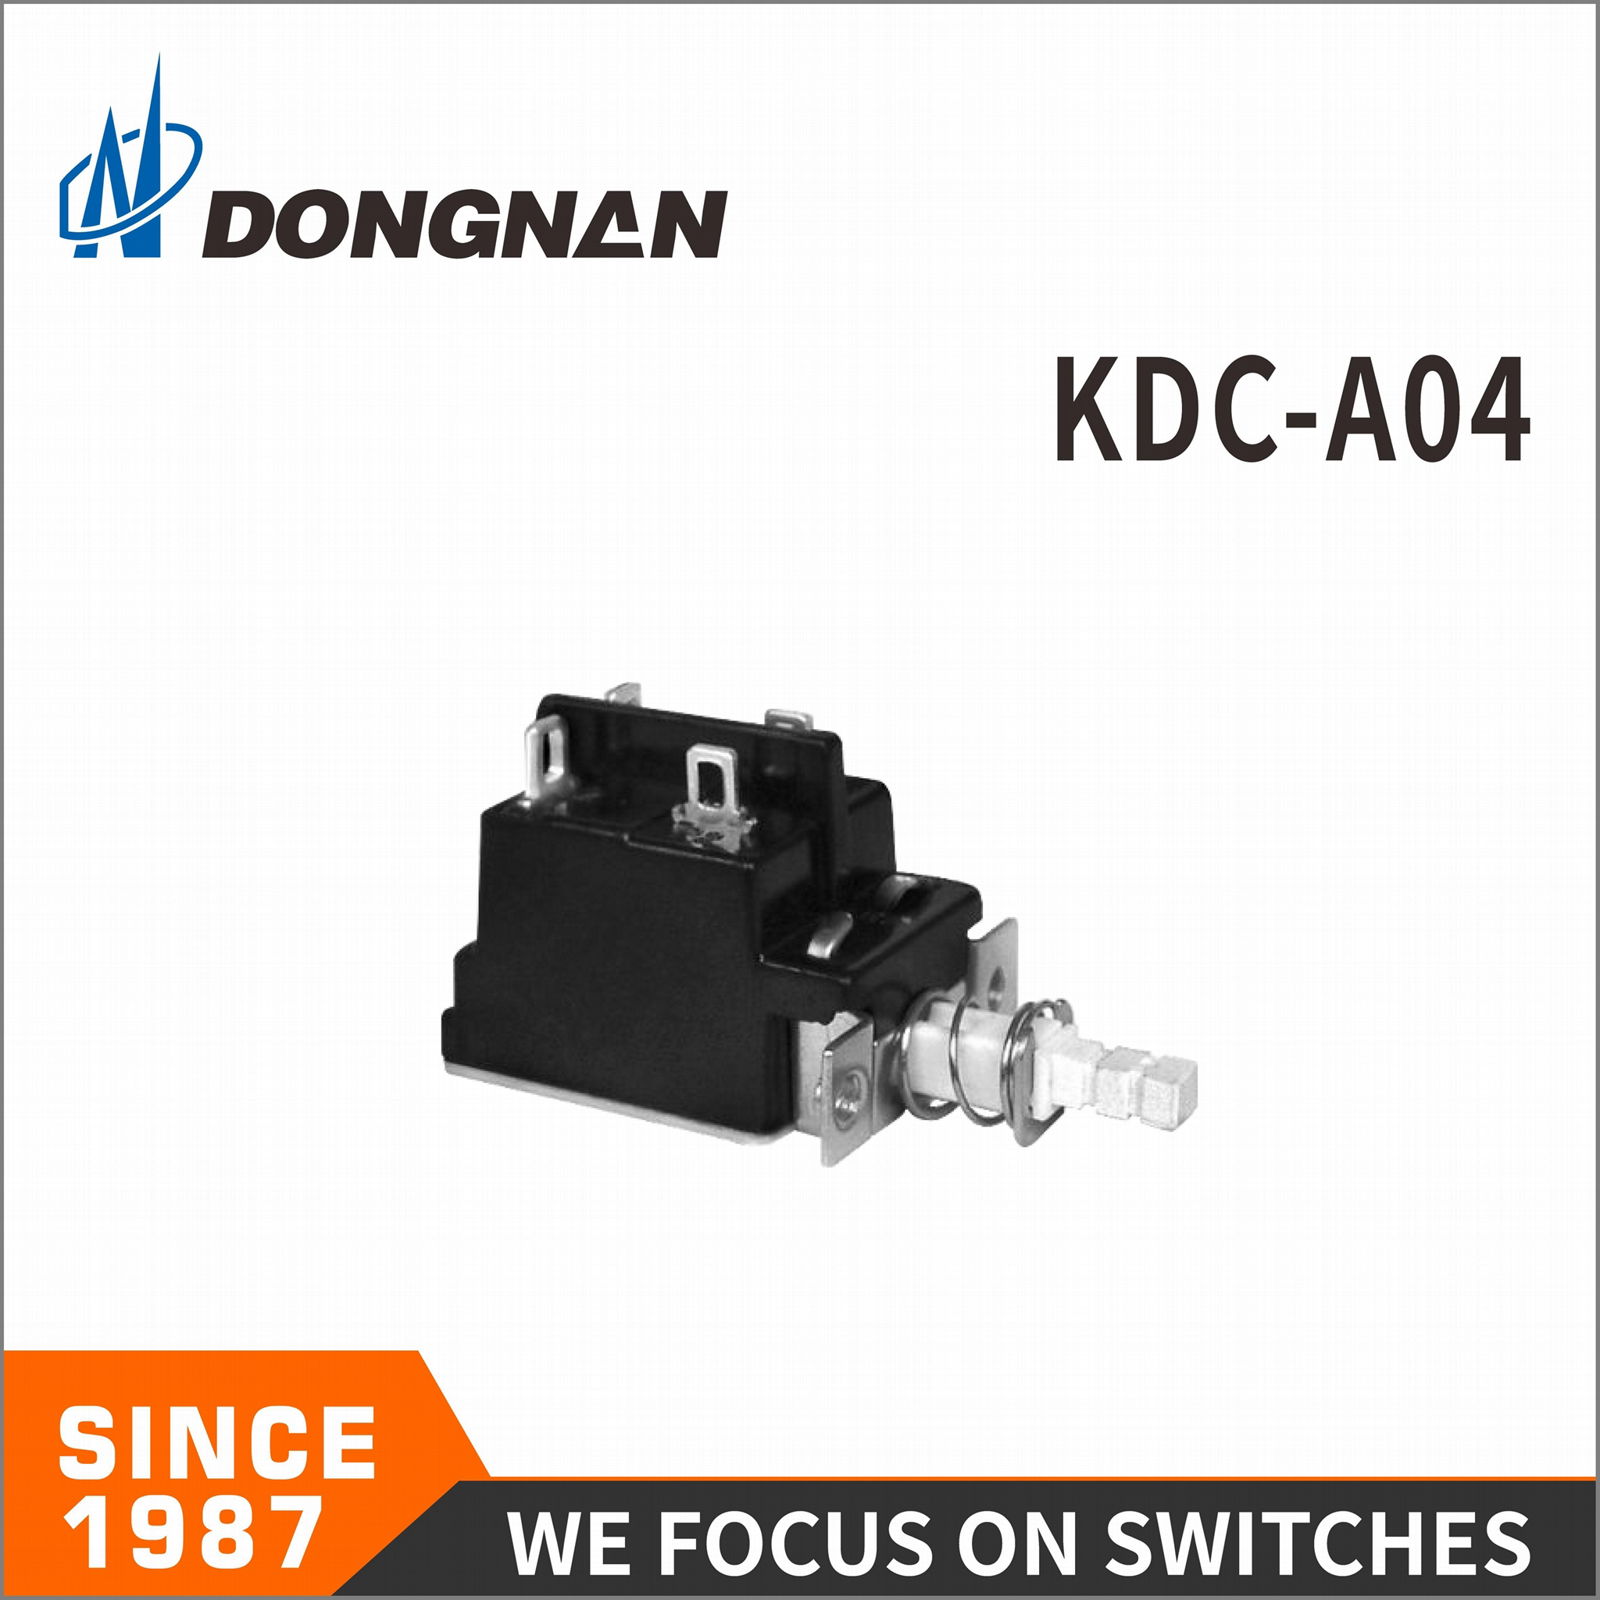 Dongnan Kdc-A04 Power Switch for Computer Long Life 2